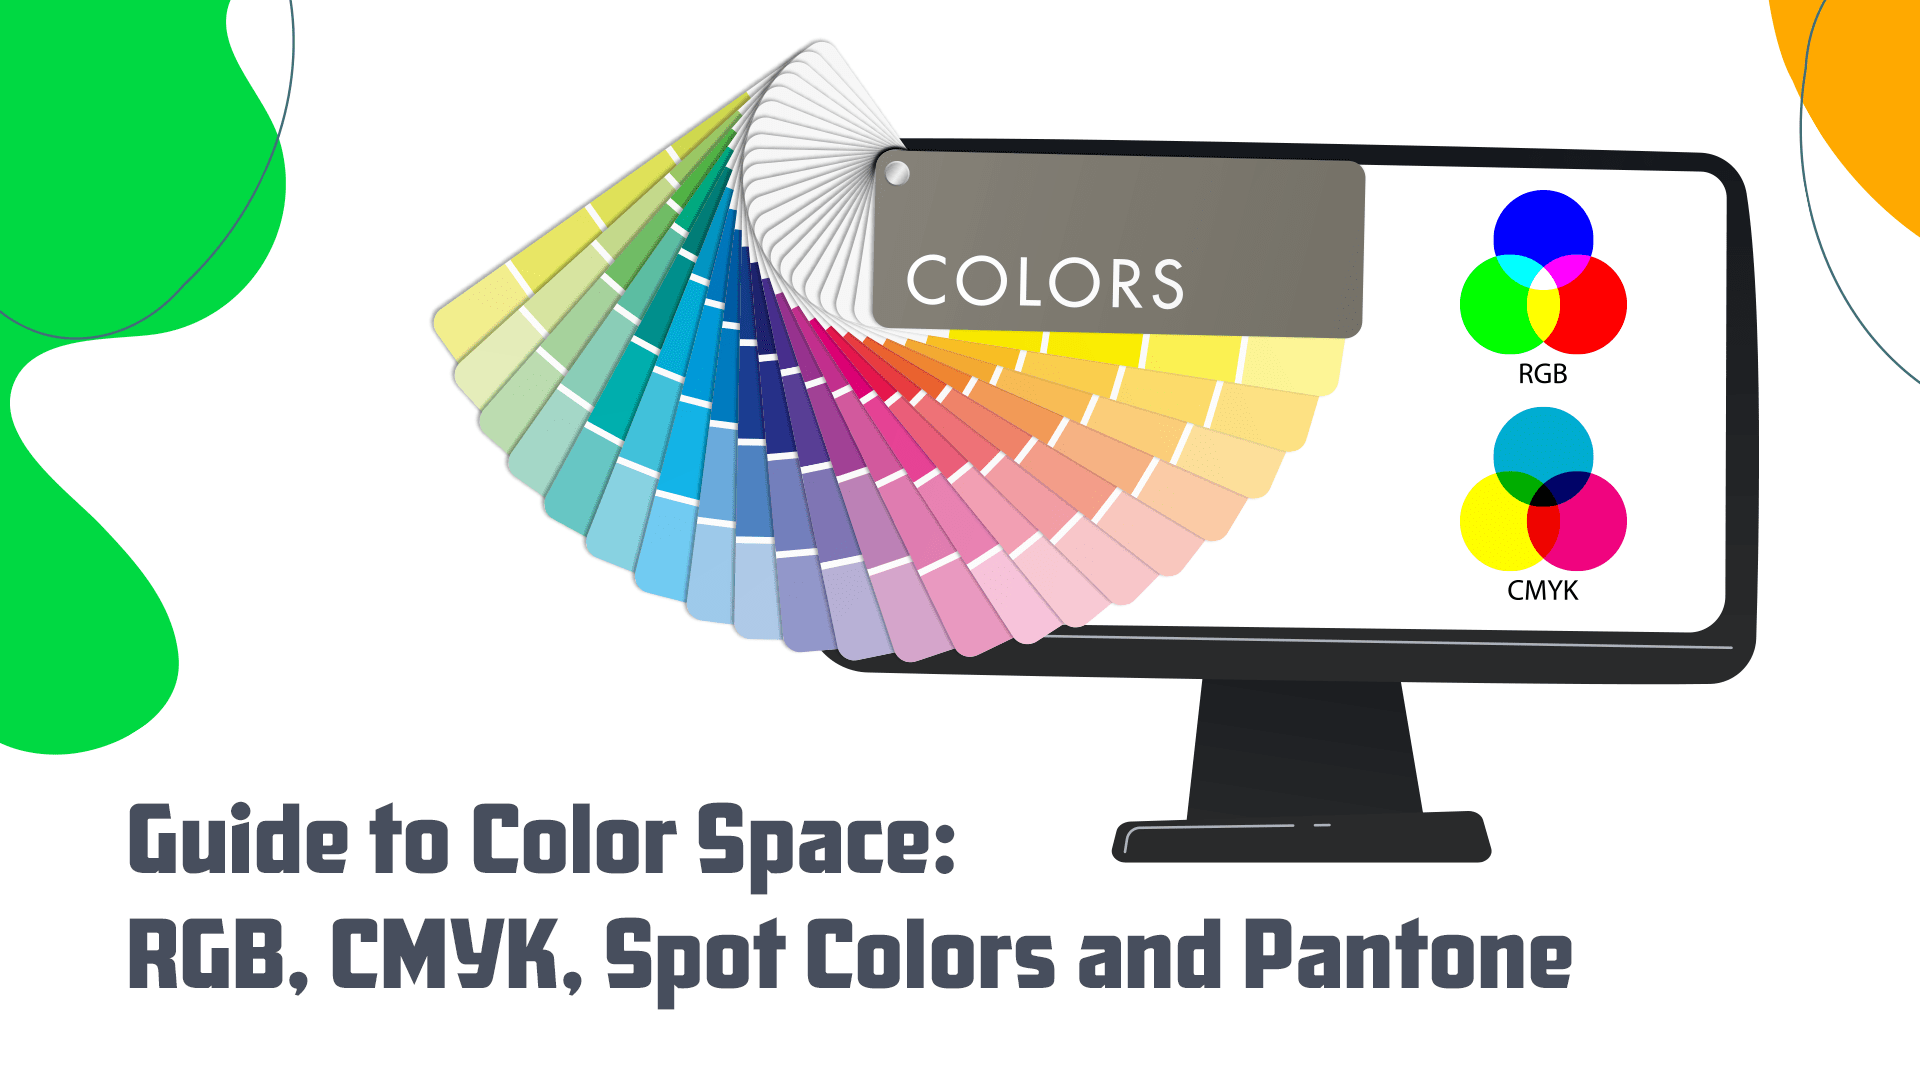 Guide to Color Space